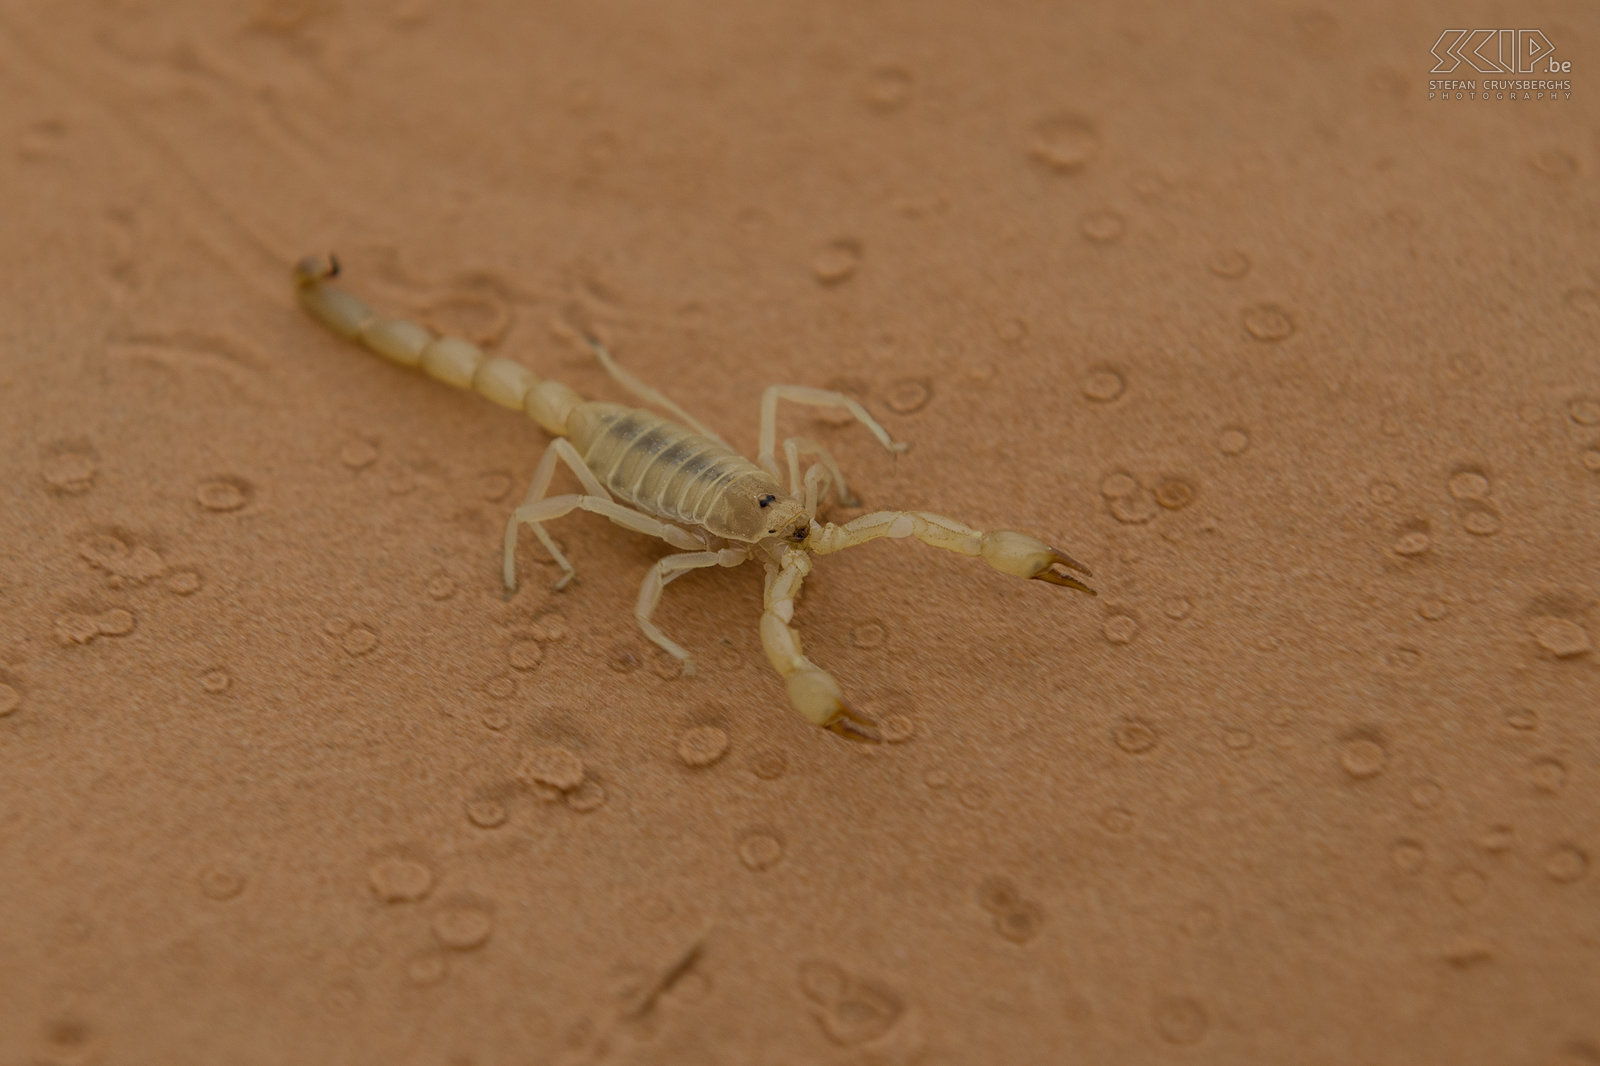 Scorpion We saw a lot of scorpions and each morning we found some hiding under our sleeping pad or backpack. Fortunately a sting of this species is painful but not life threatening. Stefan Cruysberghs